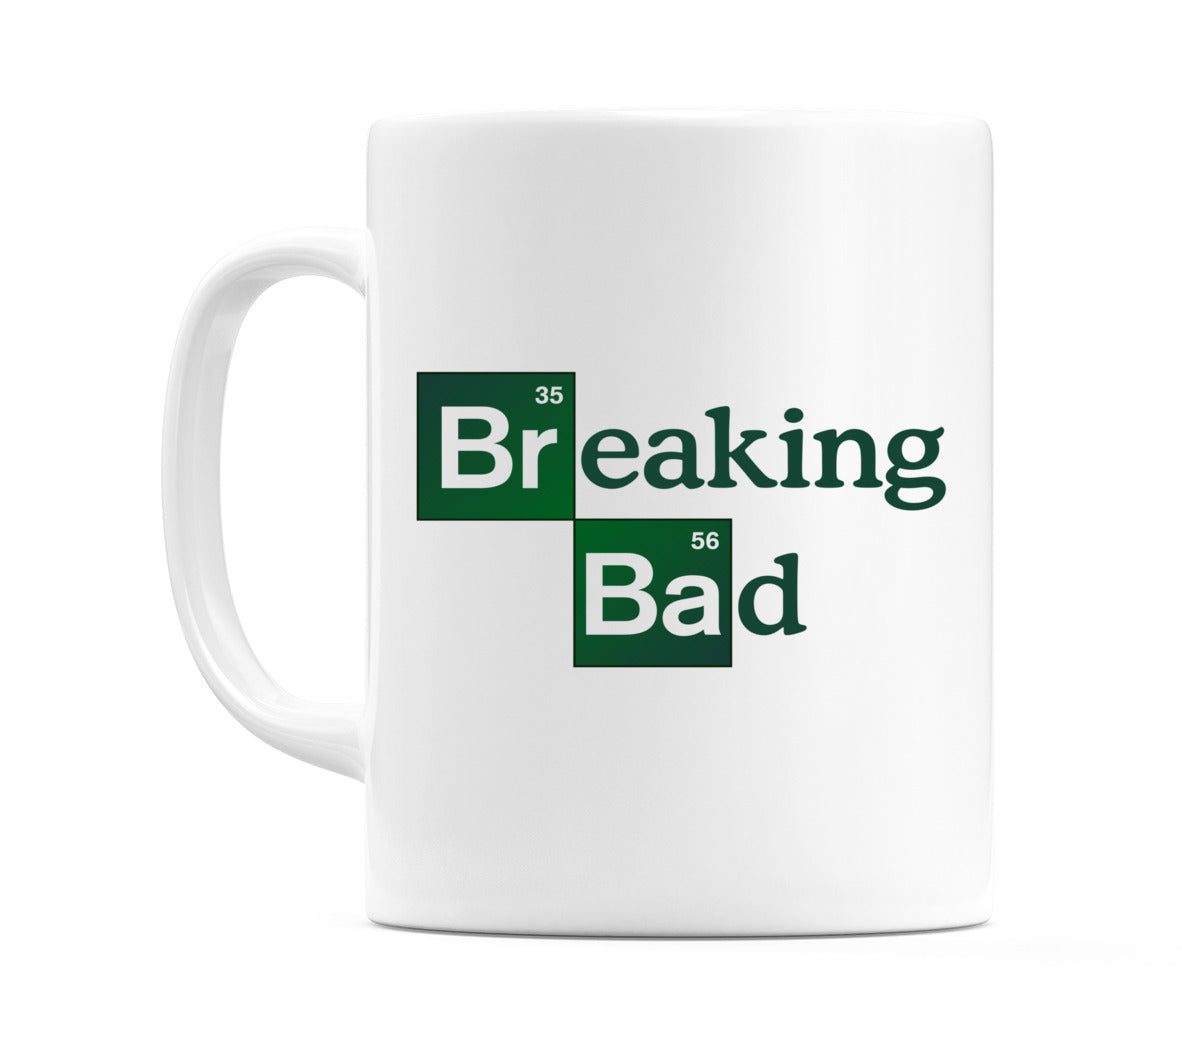 Mug with Breaking Bad text in Breaking font